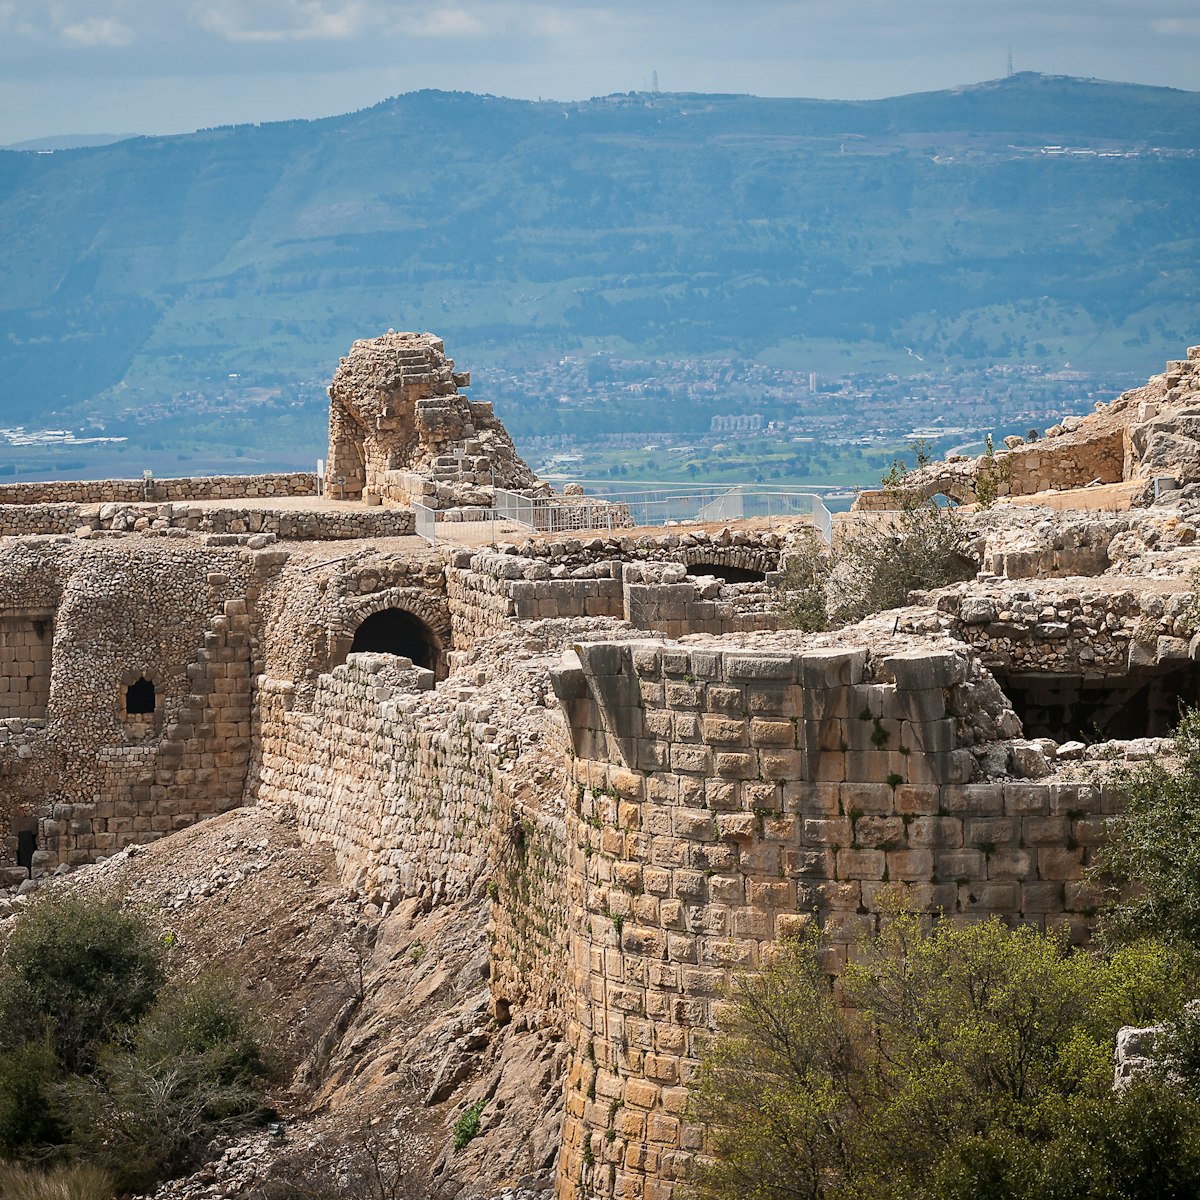 Ruins of the Nimrod Fortress, a medieval fortress situated in the northern Golan Heights, Israel.